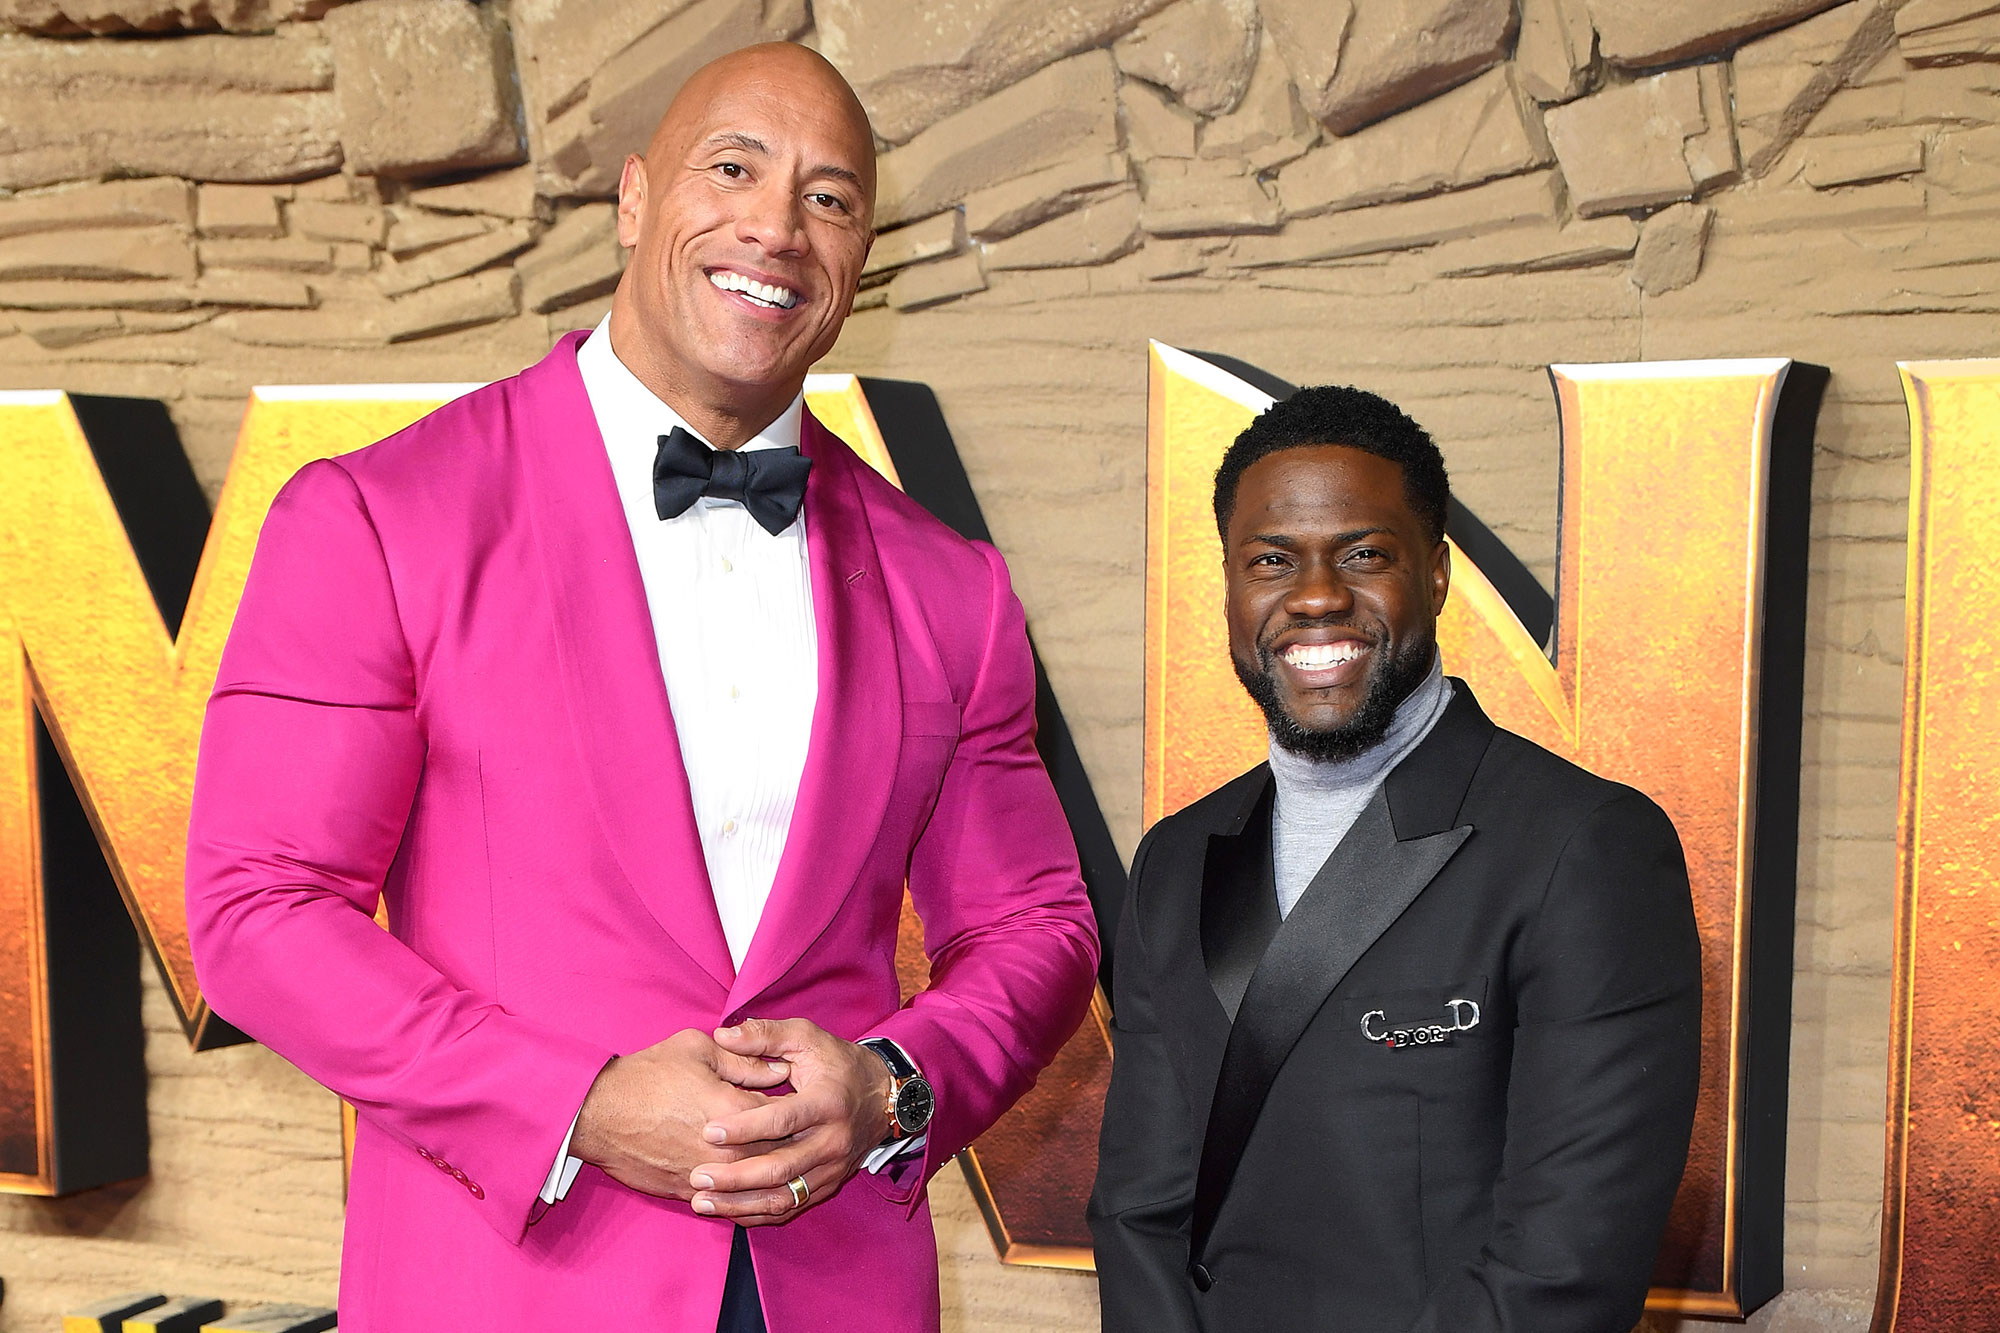 Dwayne "The Rock" Johnson and Kevin Hart posing together.